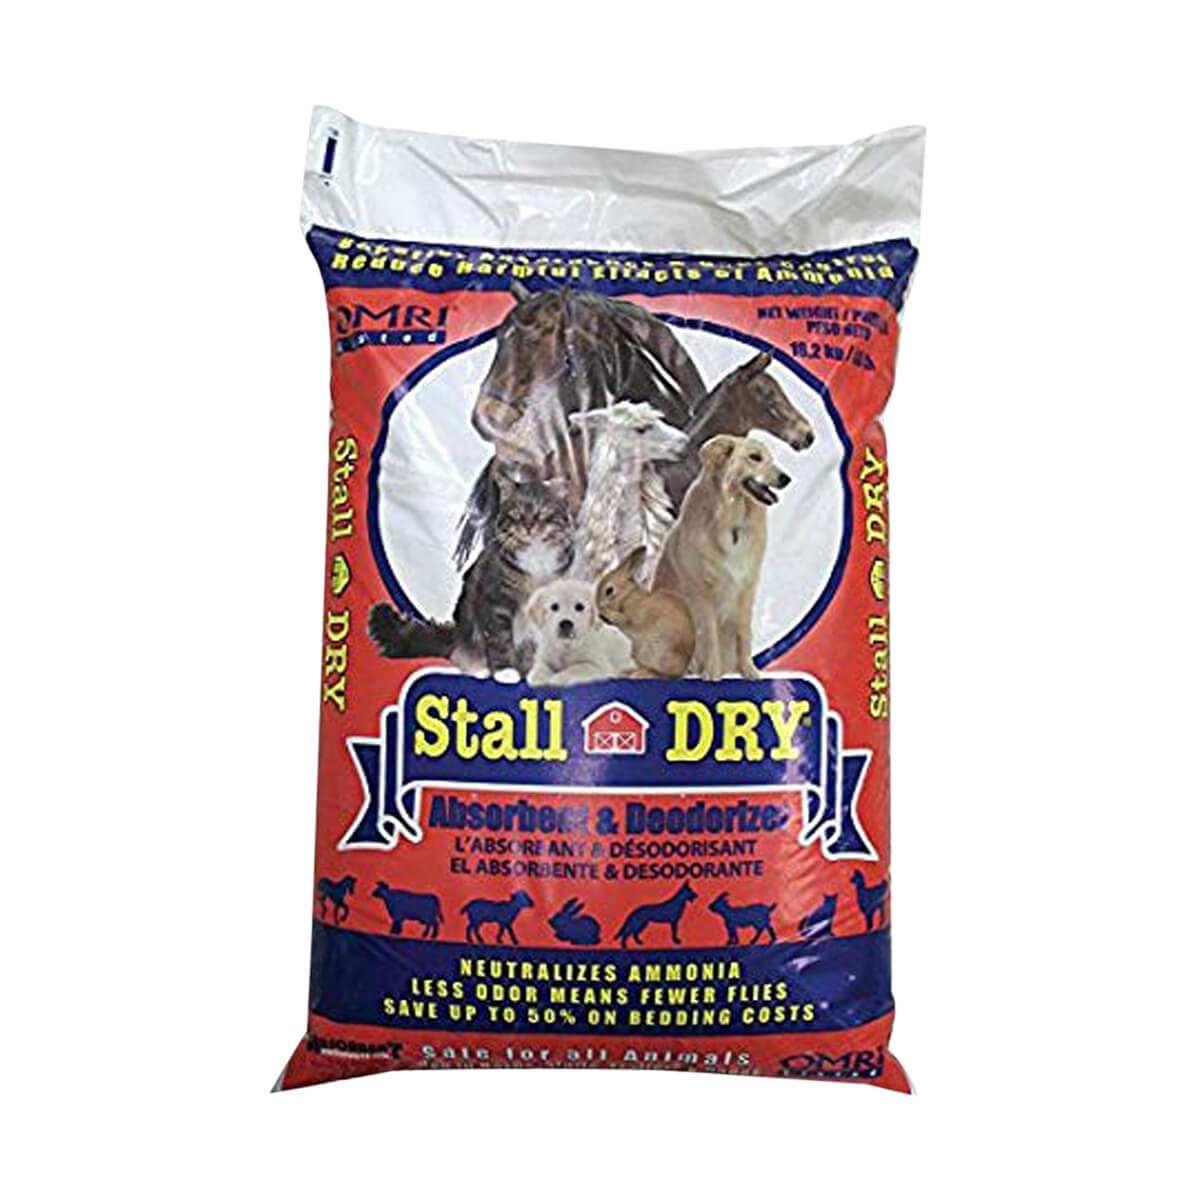 Stall Dry Absorbent & Deodorizer - 18 kg